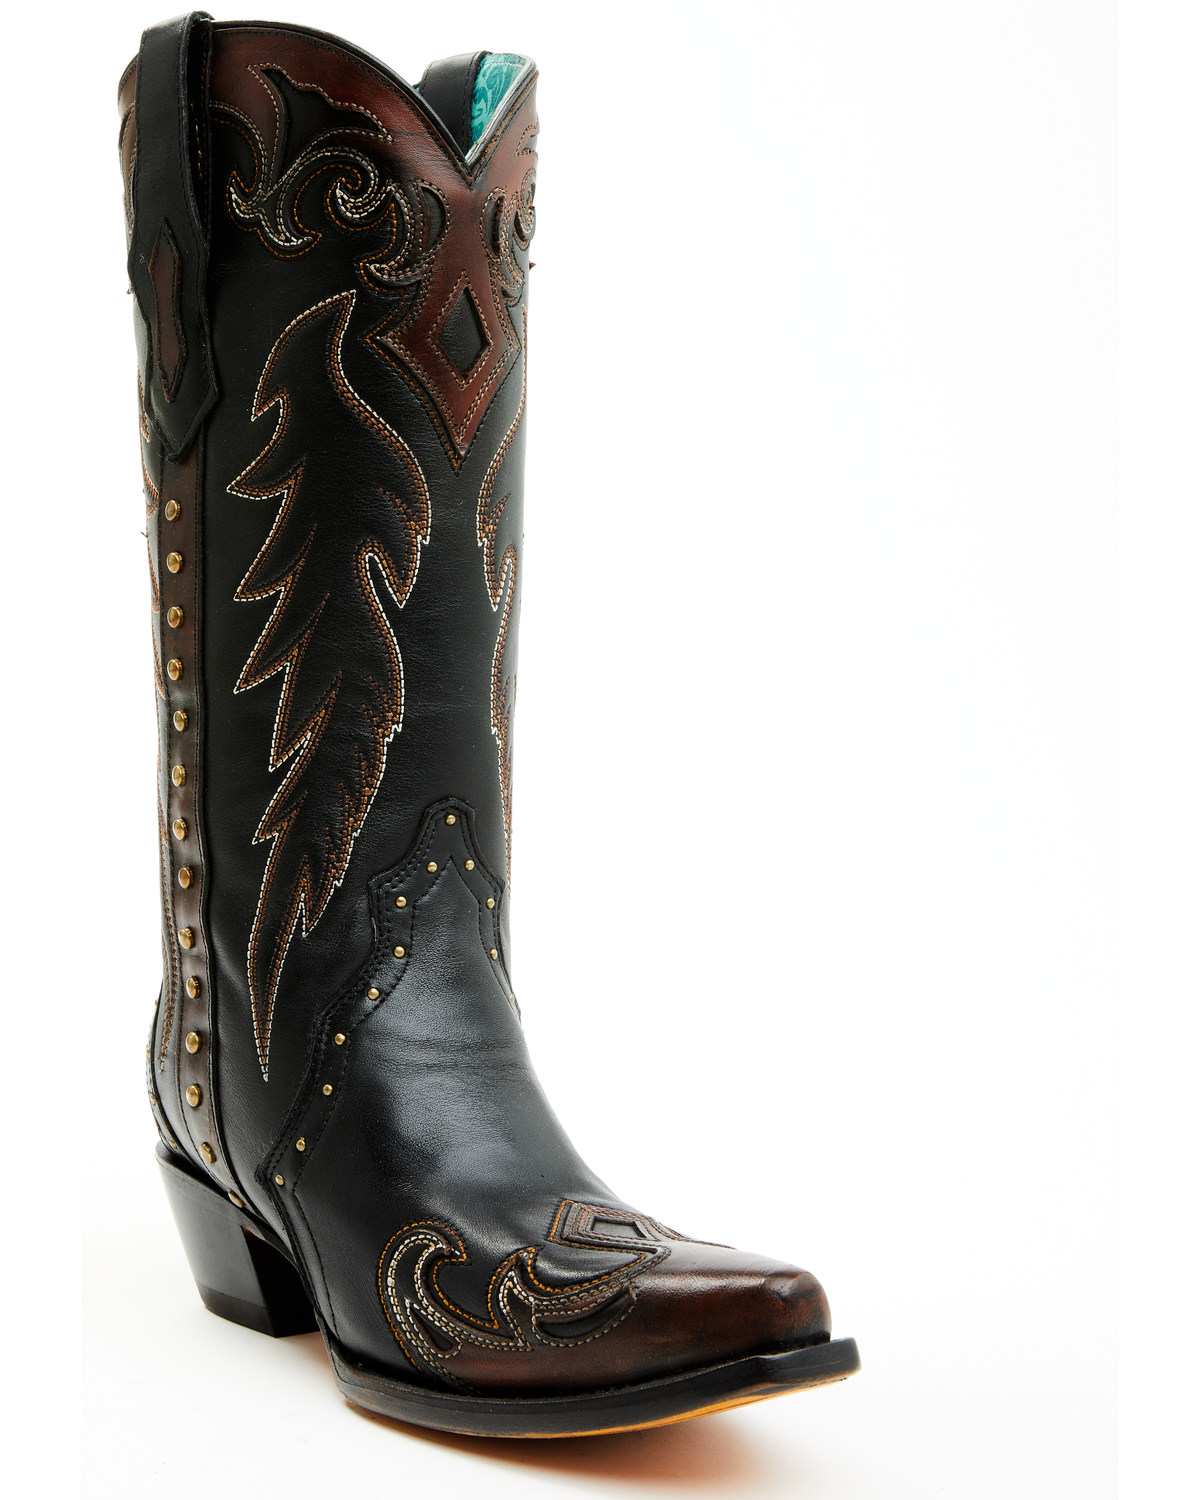 Corral Women's Triad Studded Western Boots - Snip Toe